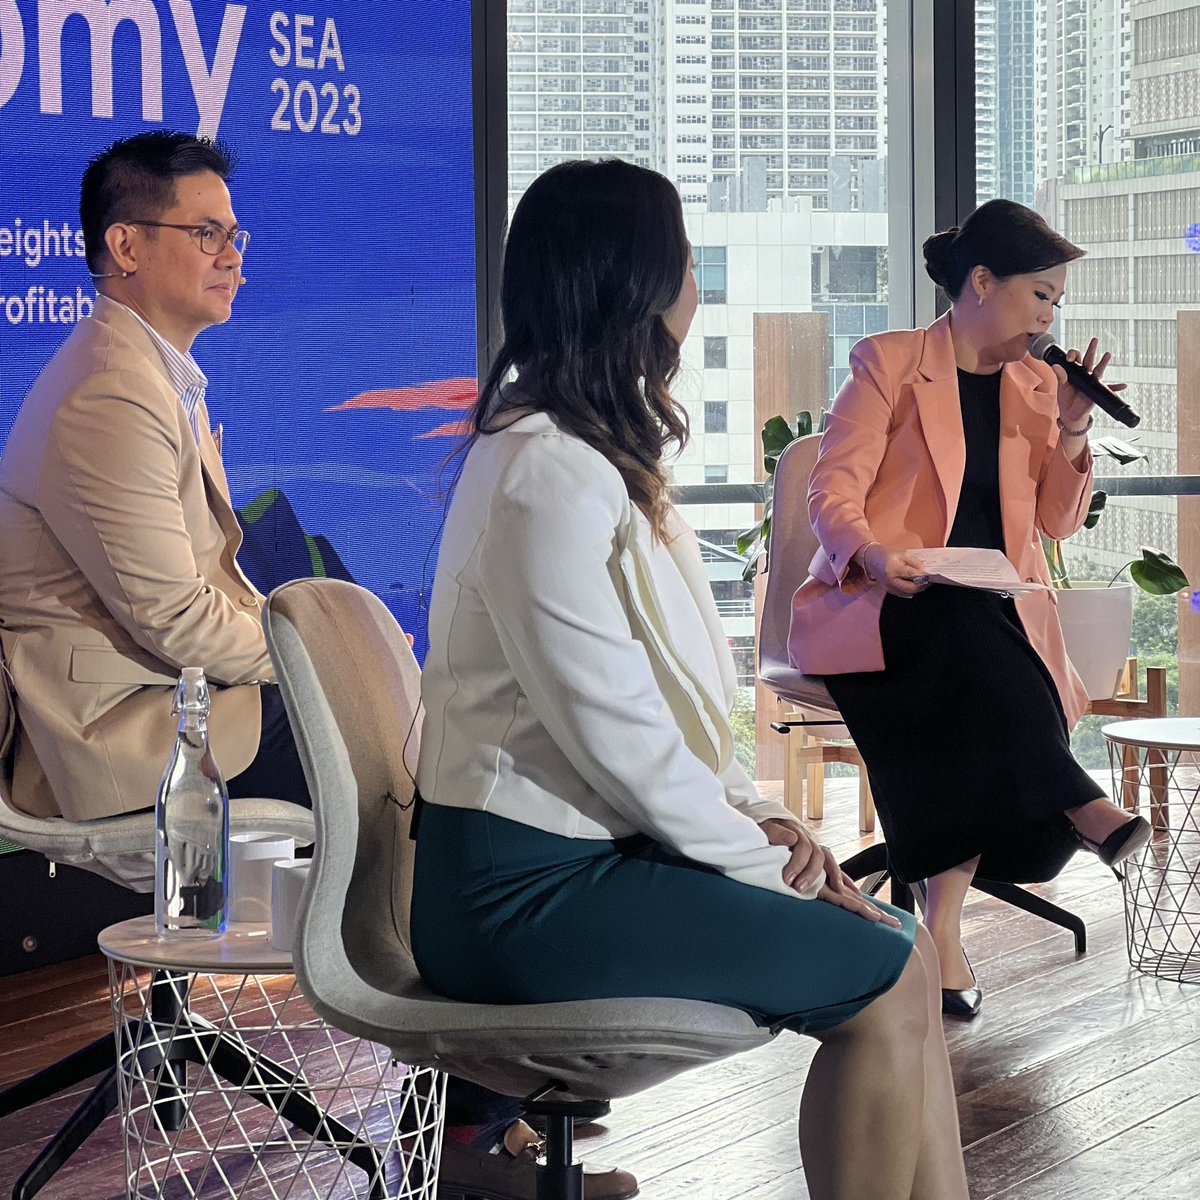 Floor is now open for Q&A for the media attendees.

#eConomySEA #DigitalDecade